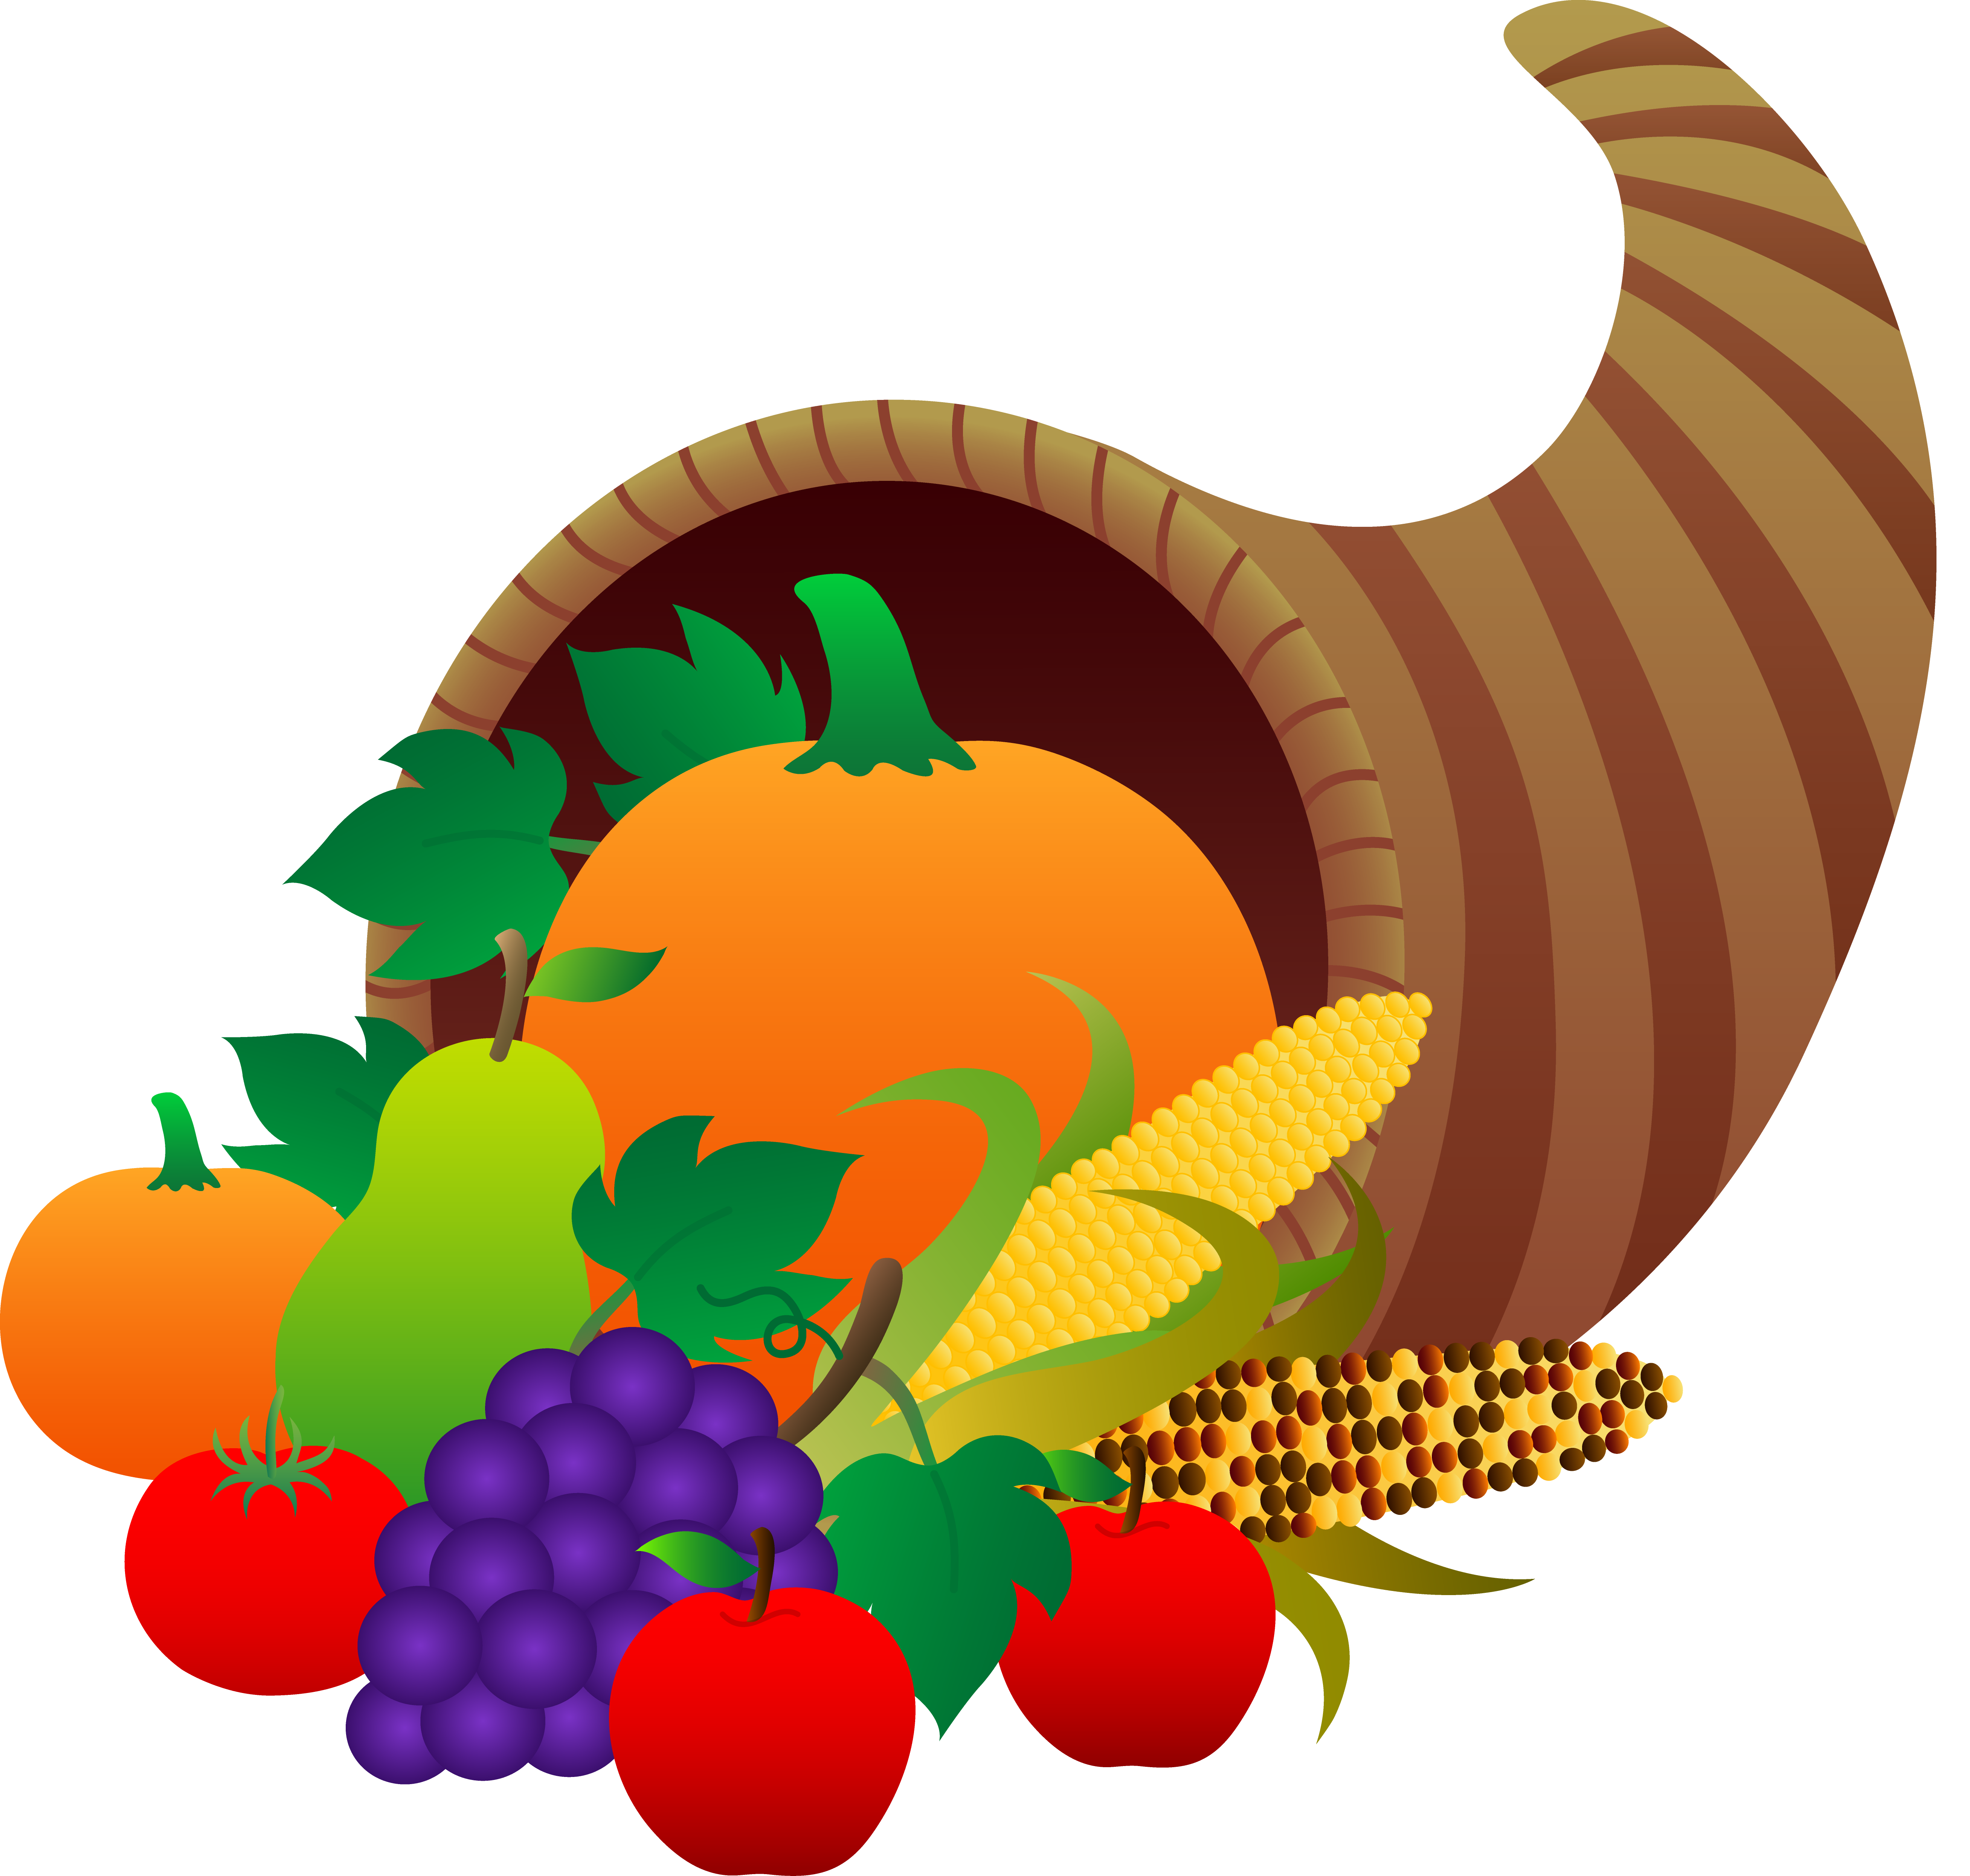 Feathers clipart thanksgiving. Harvest google search jackie